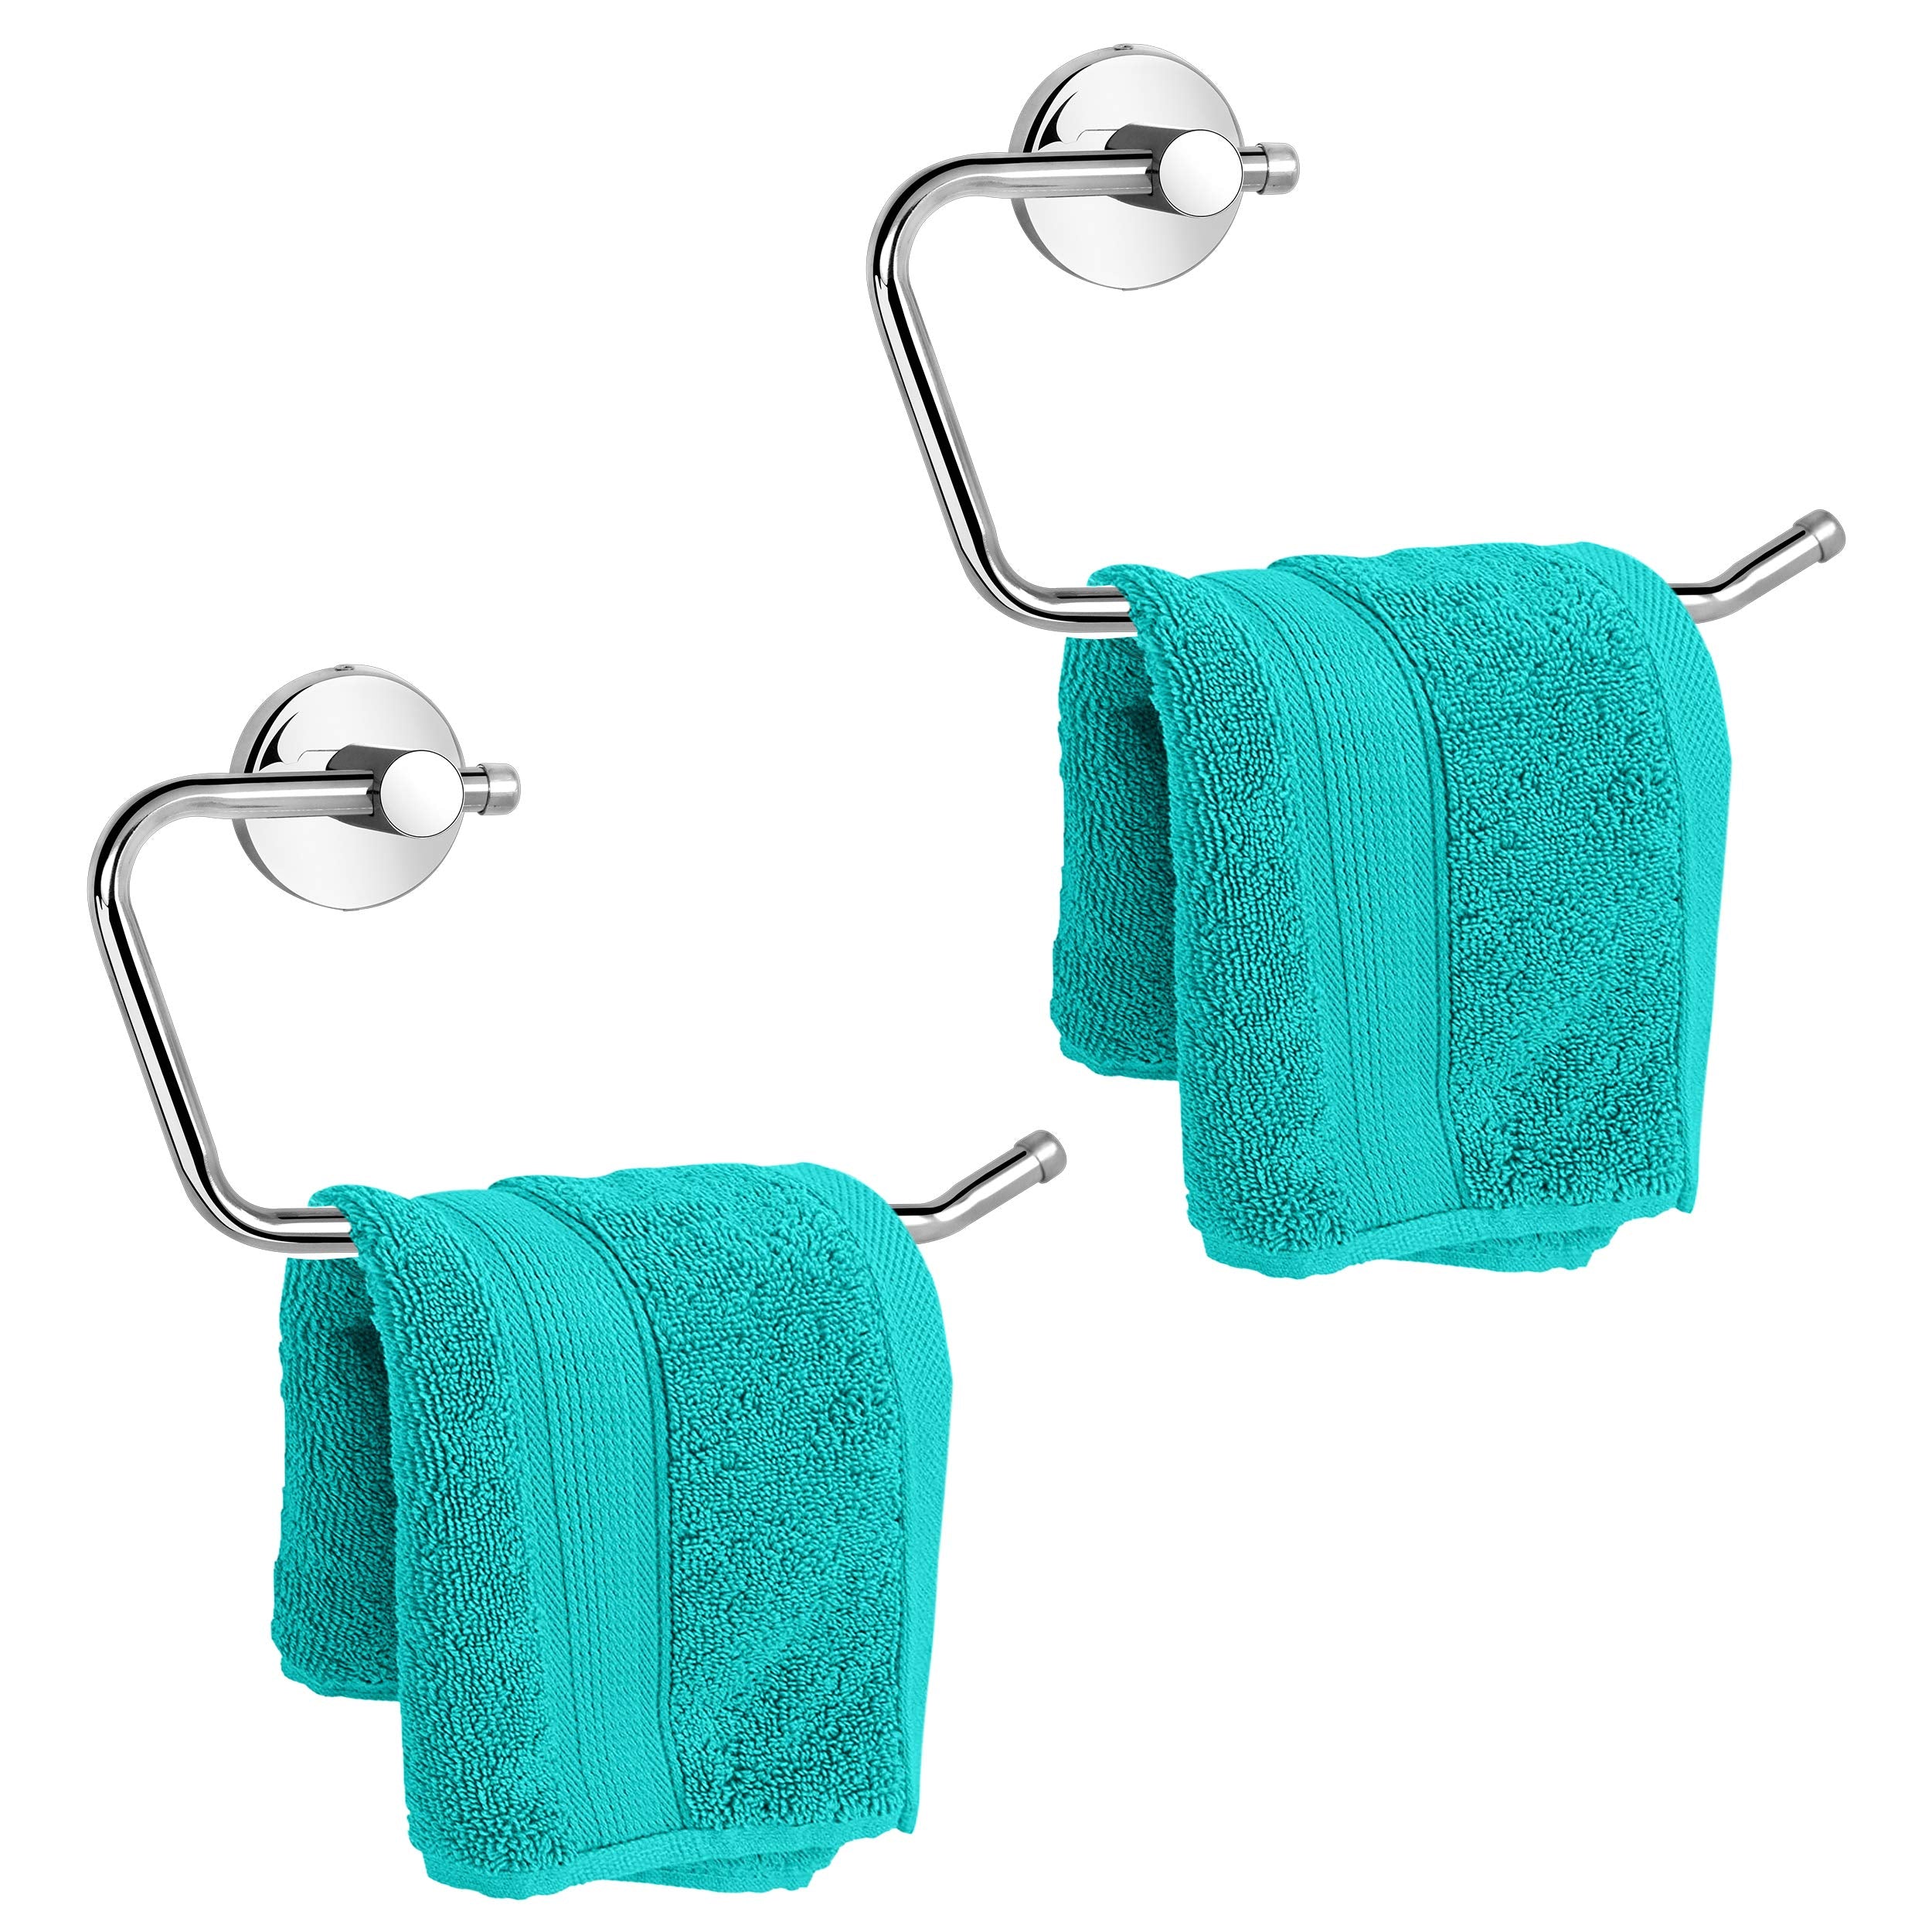 Plantex Stainless Steel Towel Ring for Bathroom/Wash Basin/Napkin-Towel Hanger/Bathroom Accessories - (Chrome) - Pack of 2